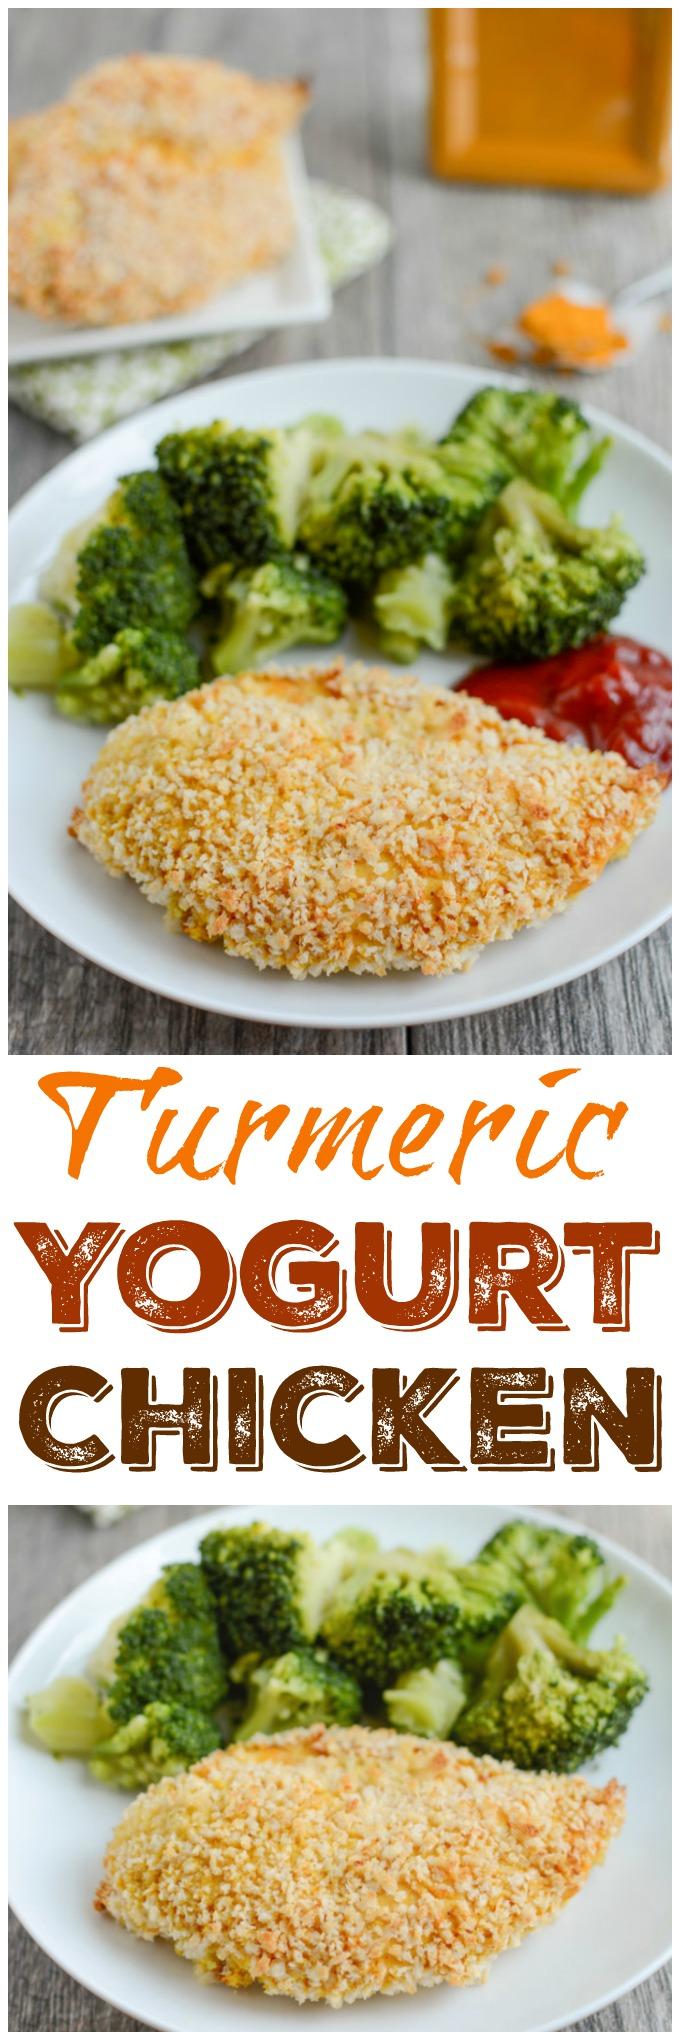 This Turmeric Yogurt Chicken is the perfect food prep recipe. Put the chicken in the marinade ahead of time, then simple coat with breadcrumbs and bake for a quick, healthy dinner!